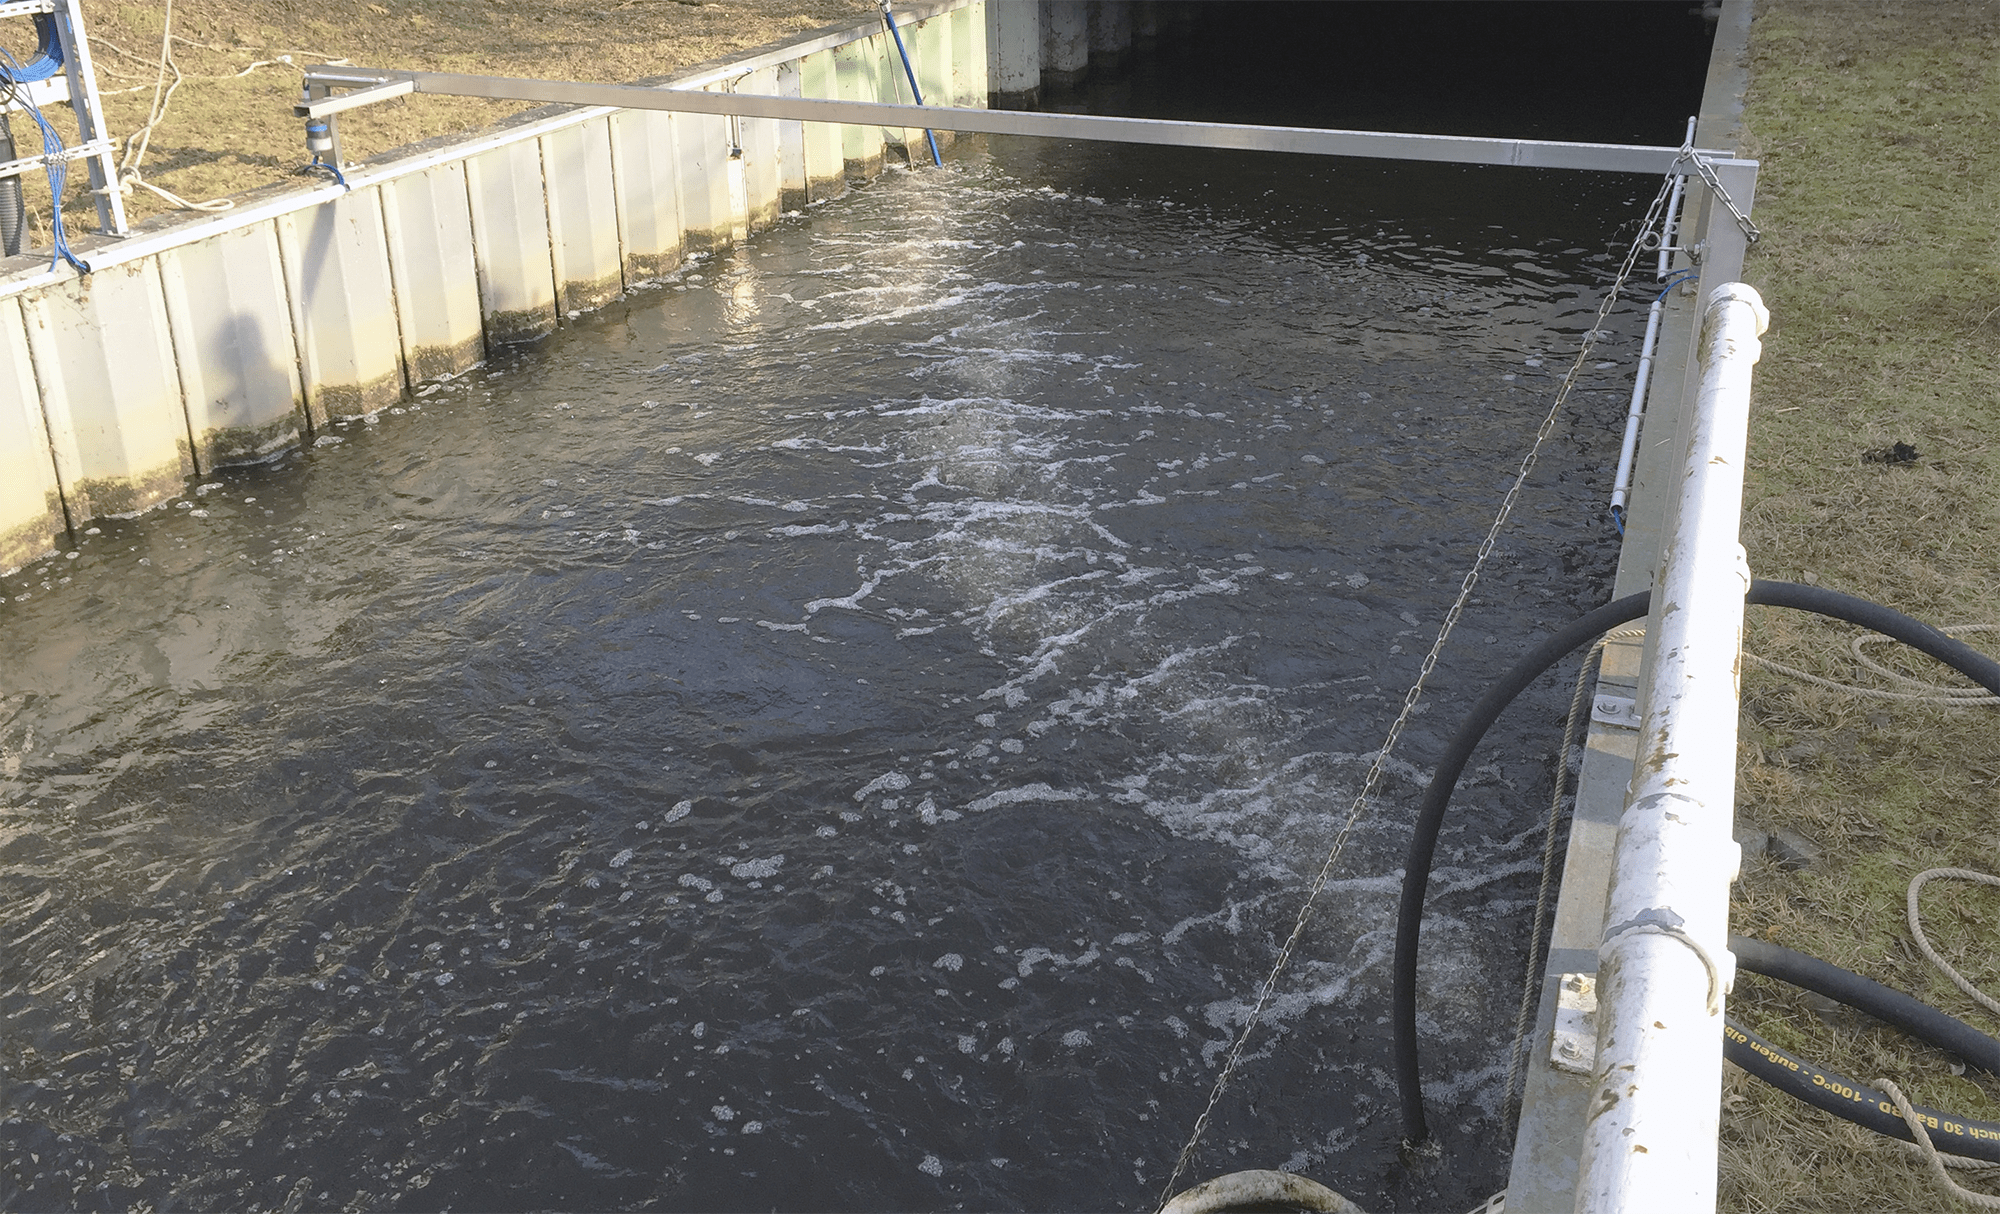 Bubble Barrier installed in Wervershoof for research on microplastics in wastewater